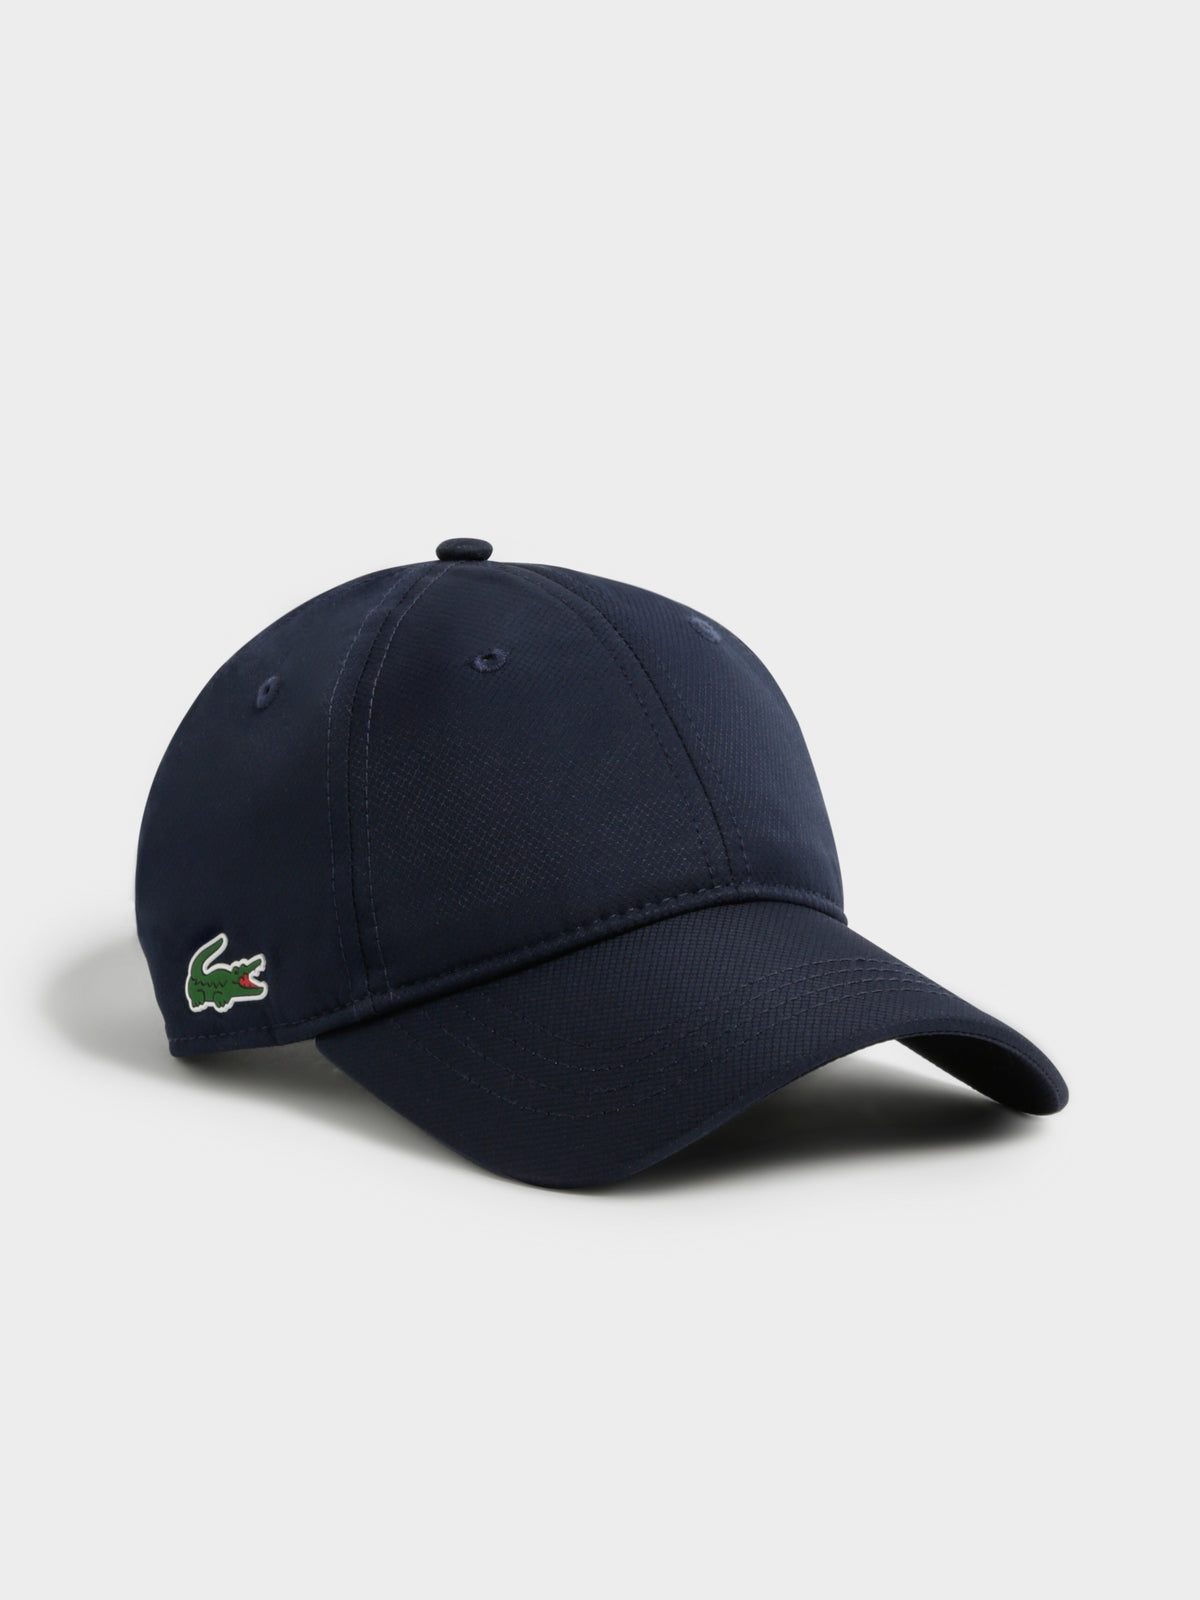 Basic Sport Dry Fit Cap in Navy Blue